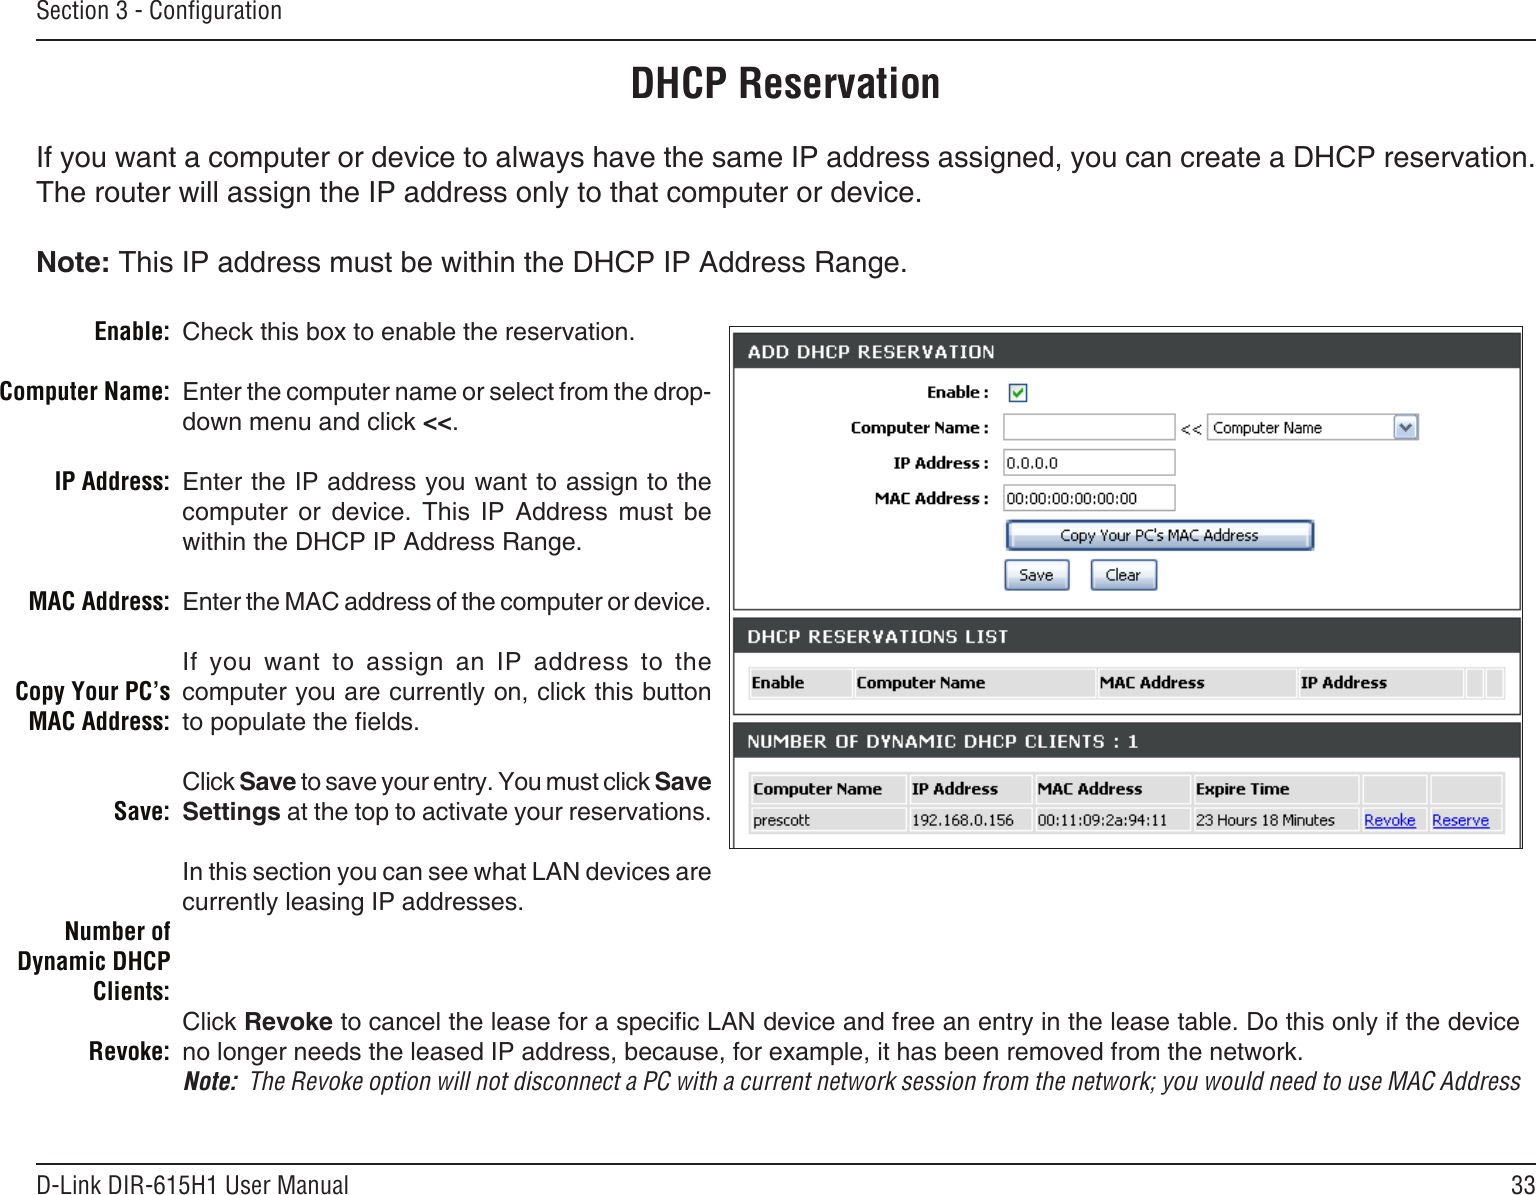 33D-Link DIR-615H1 User ManualSection 3 - CongurationDHCP ReservationIf you want a computer or device to always have the same IP address assigned, you can create a DHCP reservation. The router will assign the IP address only to that computer or device. Note: This IP address must be within the DHCP IP Address Range.Check this box to enable the reservation.Enter the computer name or select from the drop-down menu and click &lt;&lt;.Enter the IP address you want to assign to the computer  or  device.  This  IP  Address  must  be within the DHCP IP Address Range.Enter the MAC address of the computer or device.If  you  want  to  assign  an  IP  address  to  the computer you are currently on, click this button to populate the elds. Click Save to save your entry. You must click Save Settings at the top to activate your reservations. In this section you can see what LAN devices are currently leasing IP addresses.Click Revoke to cancel the lease for a specic LAN device and free an entry in the lease table. Do this only if the device no longer needs the leased IP address, because, for example, it has been removed from the network.Note:  The Revoke option will not disconnect a PC with a current network session from the network; you would need to use MAC Address Enable:Computer Name:IP Address:MAC Address:Copy Your PC’s MAC Address:Save:Number of Dynamic DHCP Clients:Revoke: